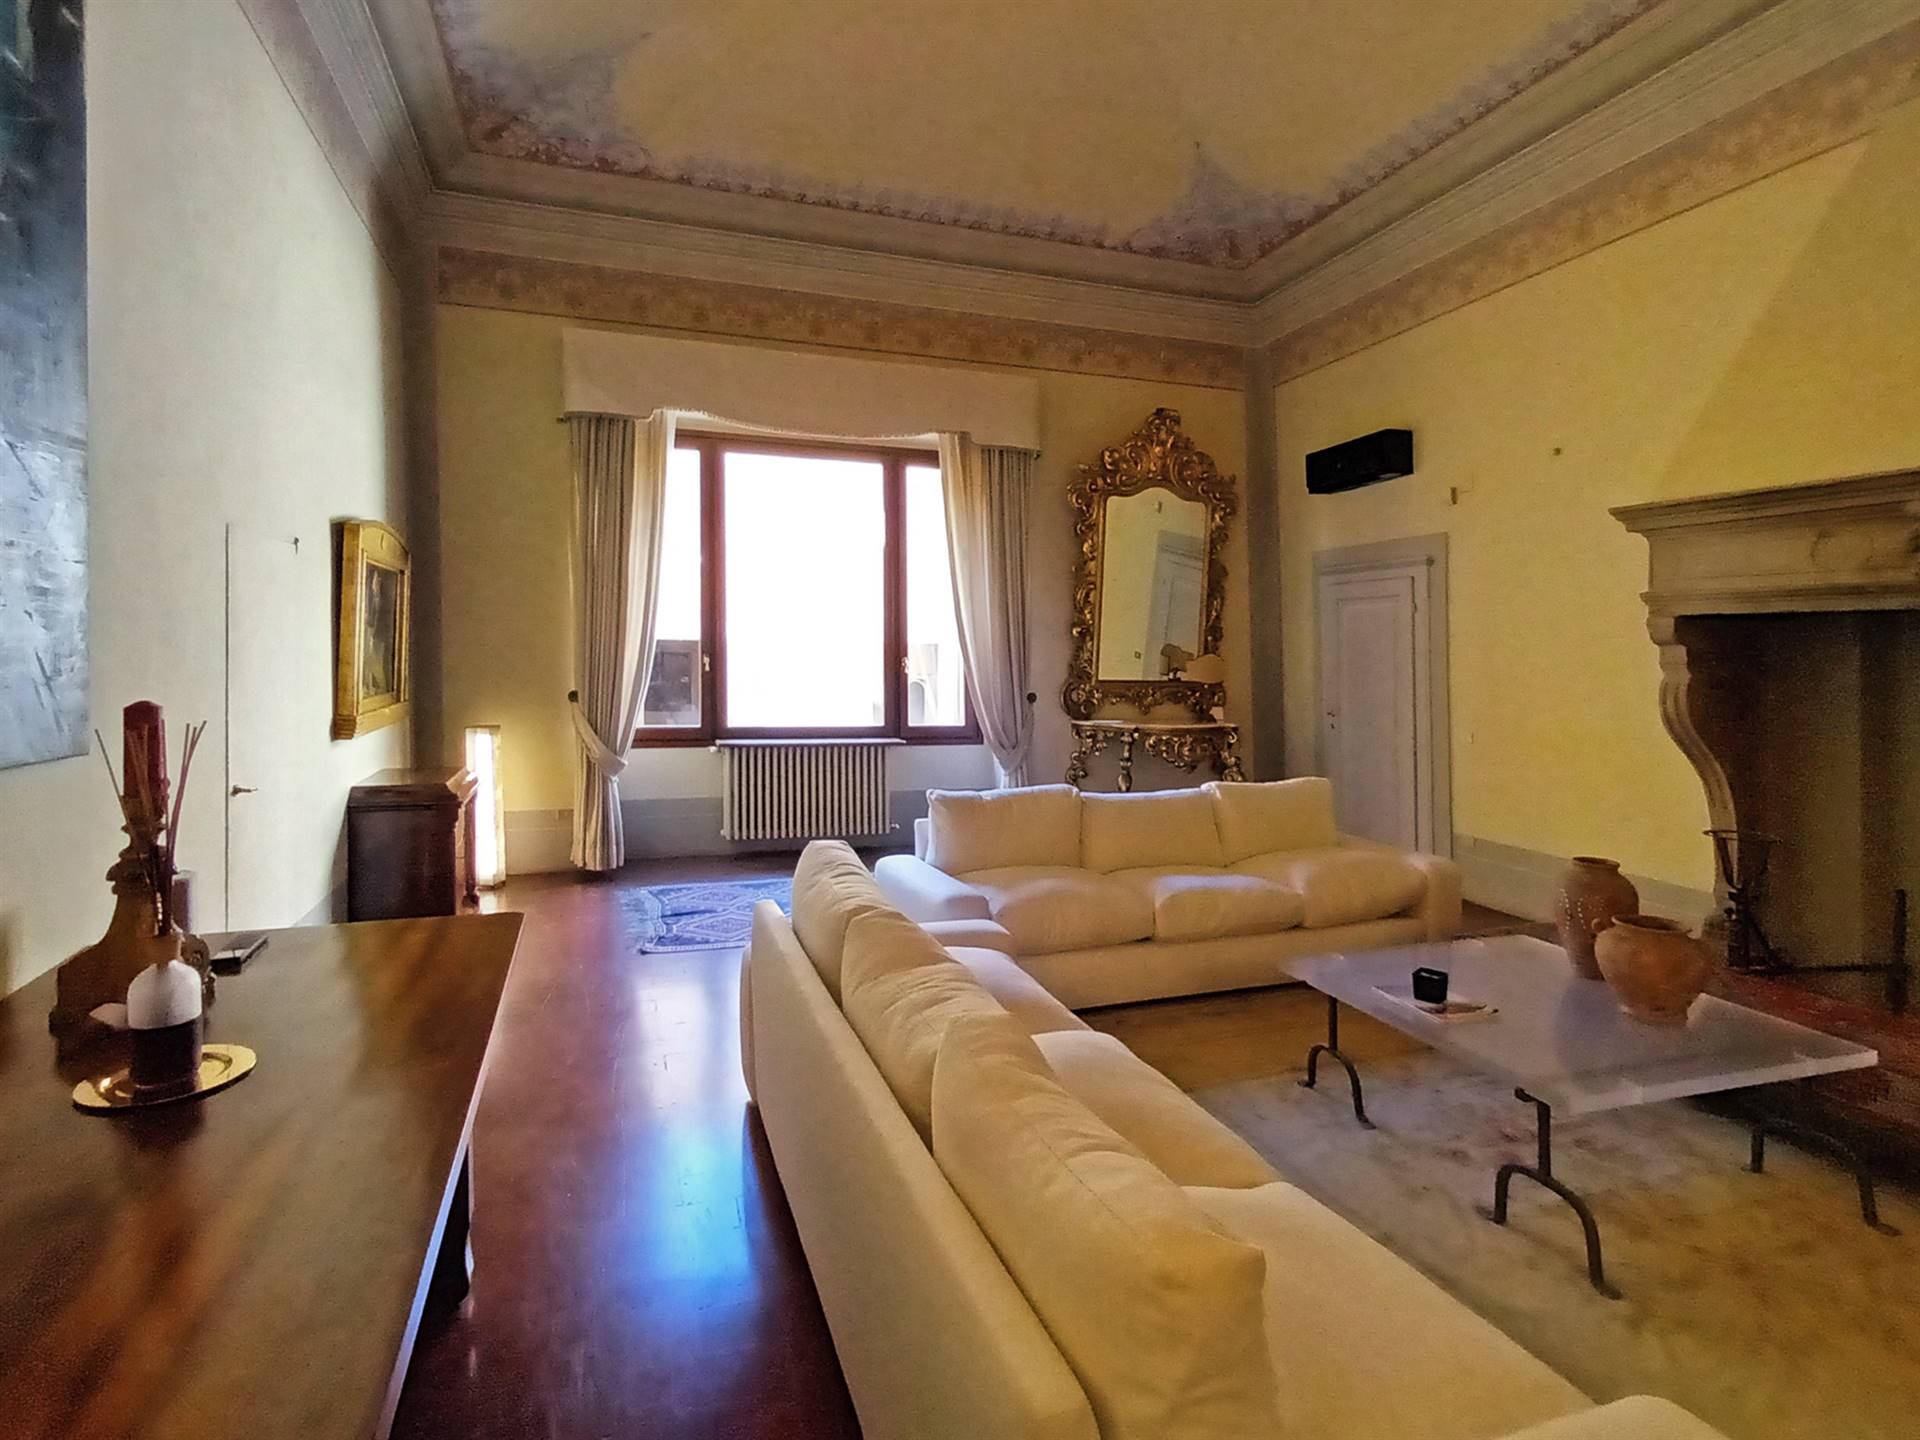 SANTO SPIRITO, FIRENZE, Apartment for rent of 300 Sq. mt., Excellent Condition, Heating Individual heating system, Energetic class: G, Epi: 222 